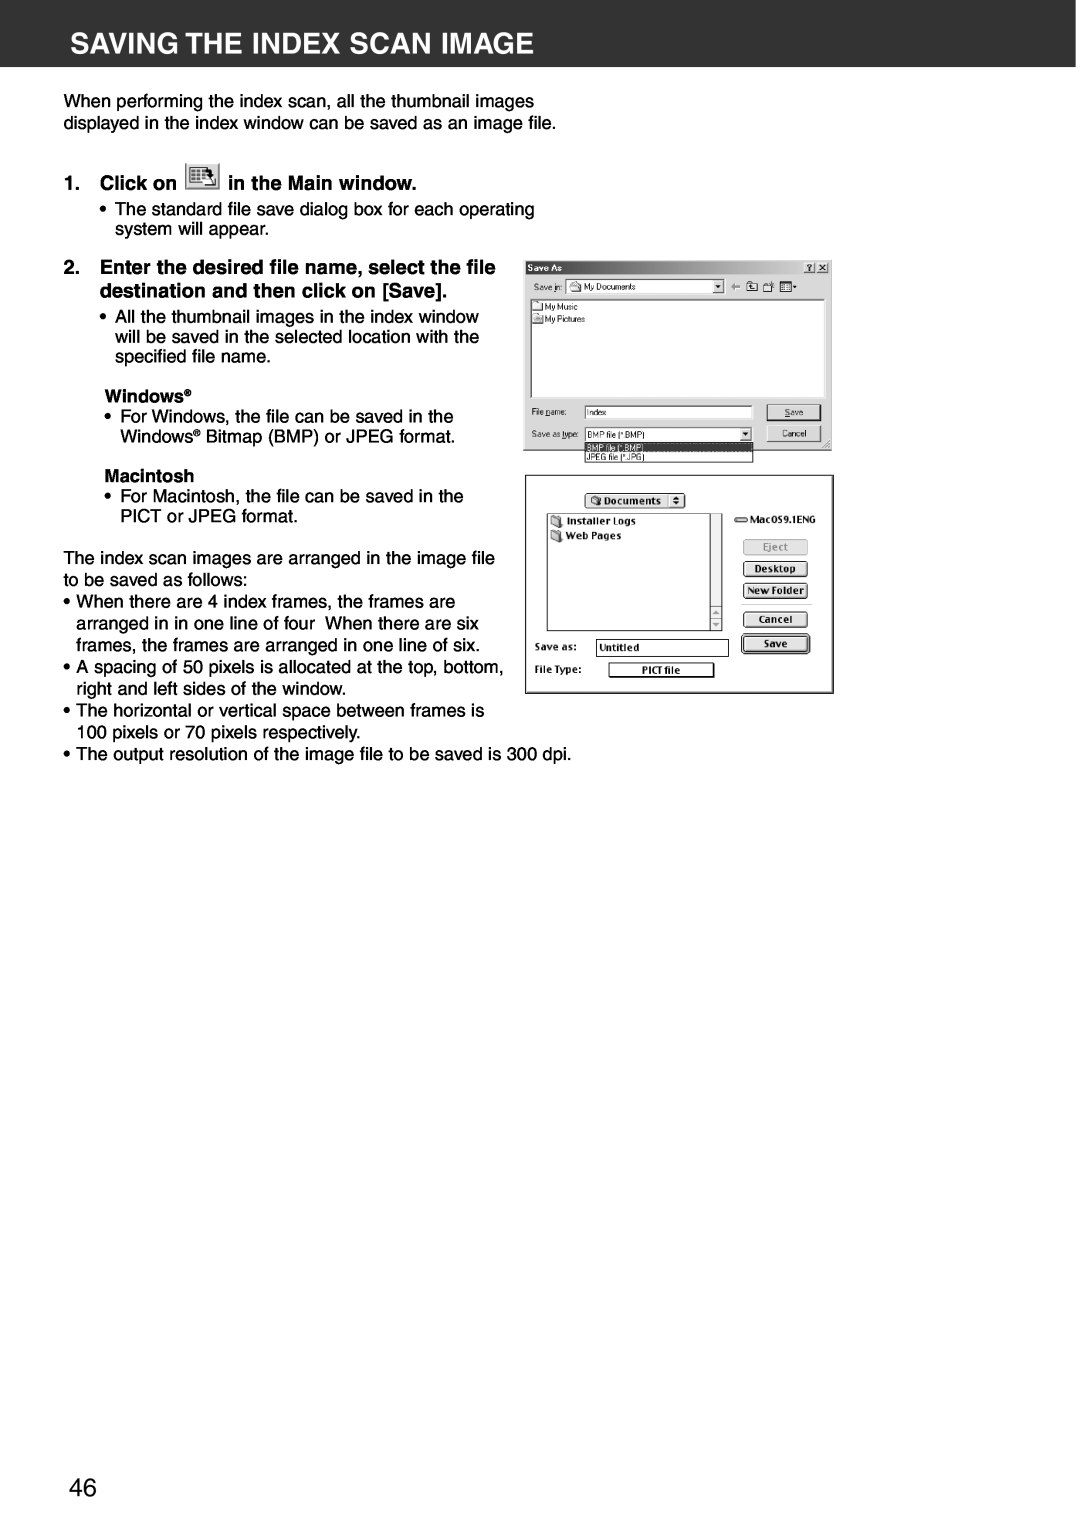 Konica Minolta Scan Multi PRO instruction manual Saving The Index Scan Image, Click on in the Main window 